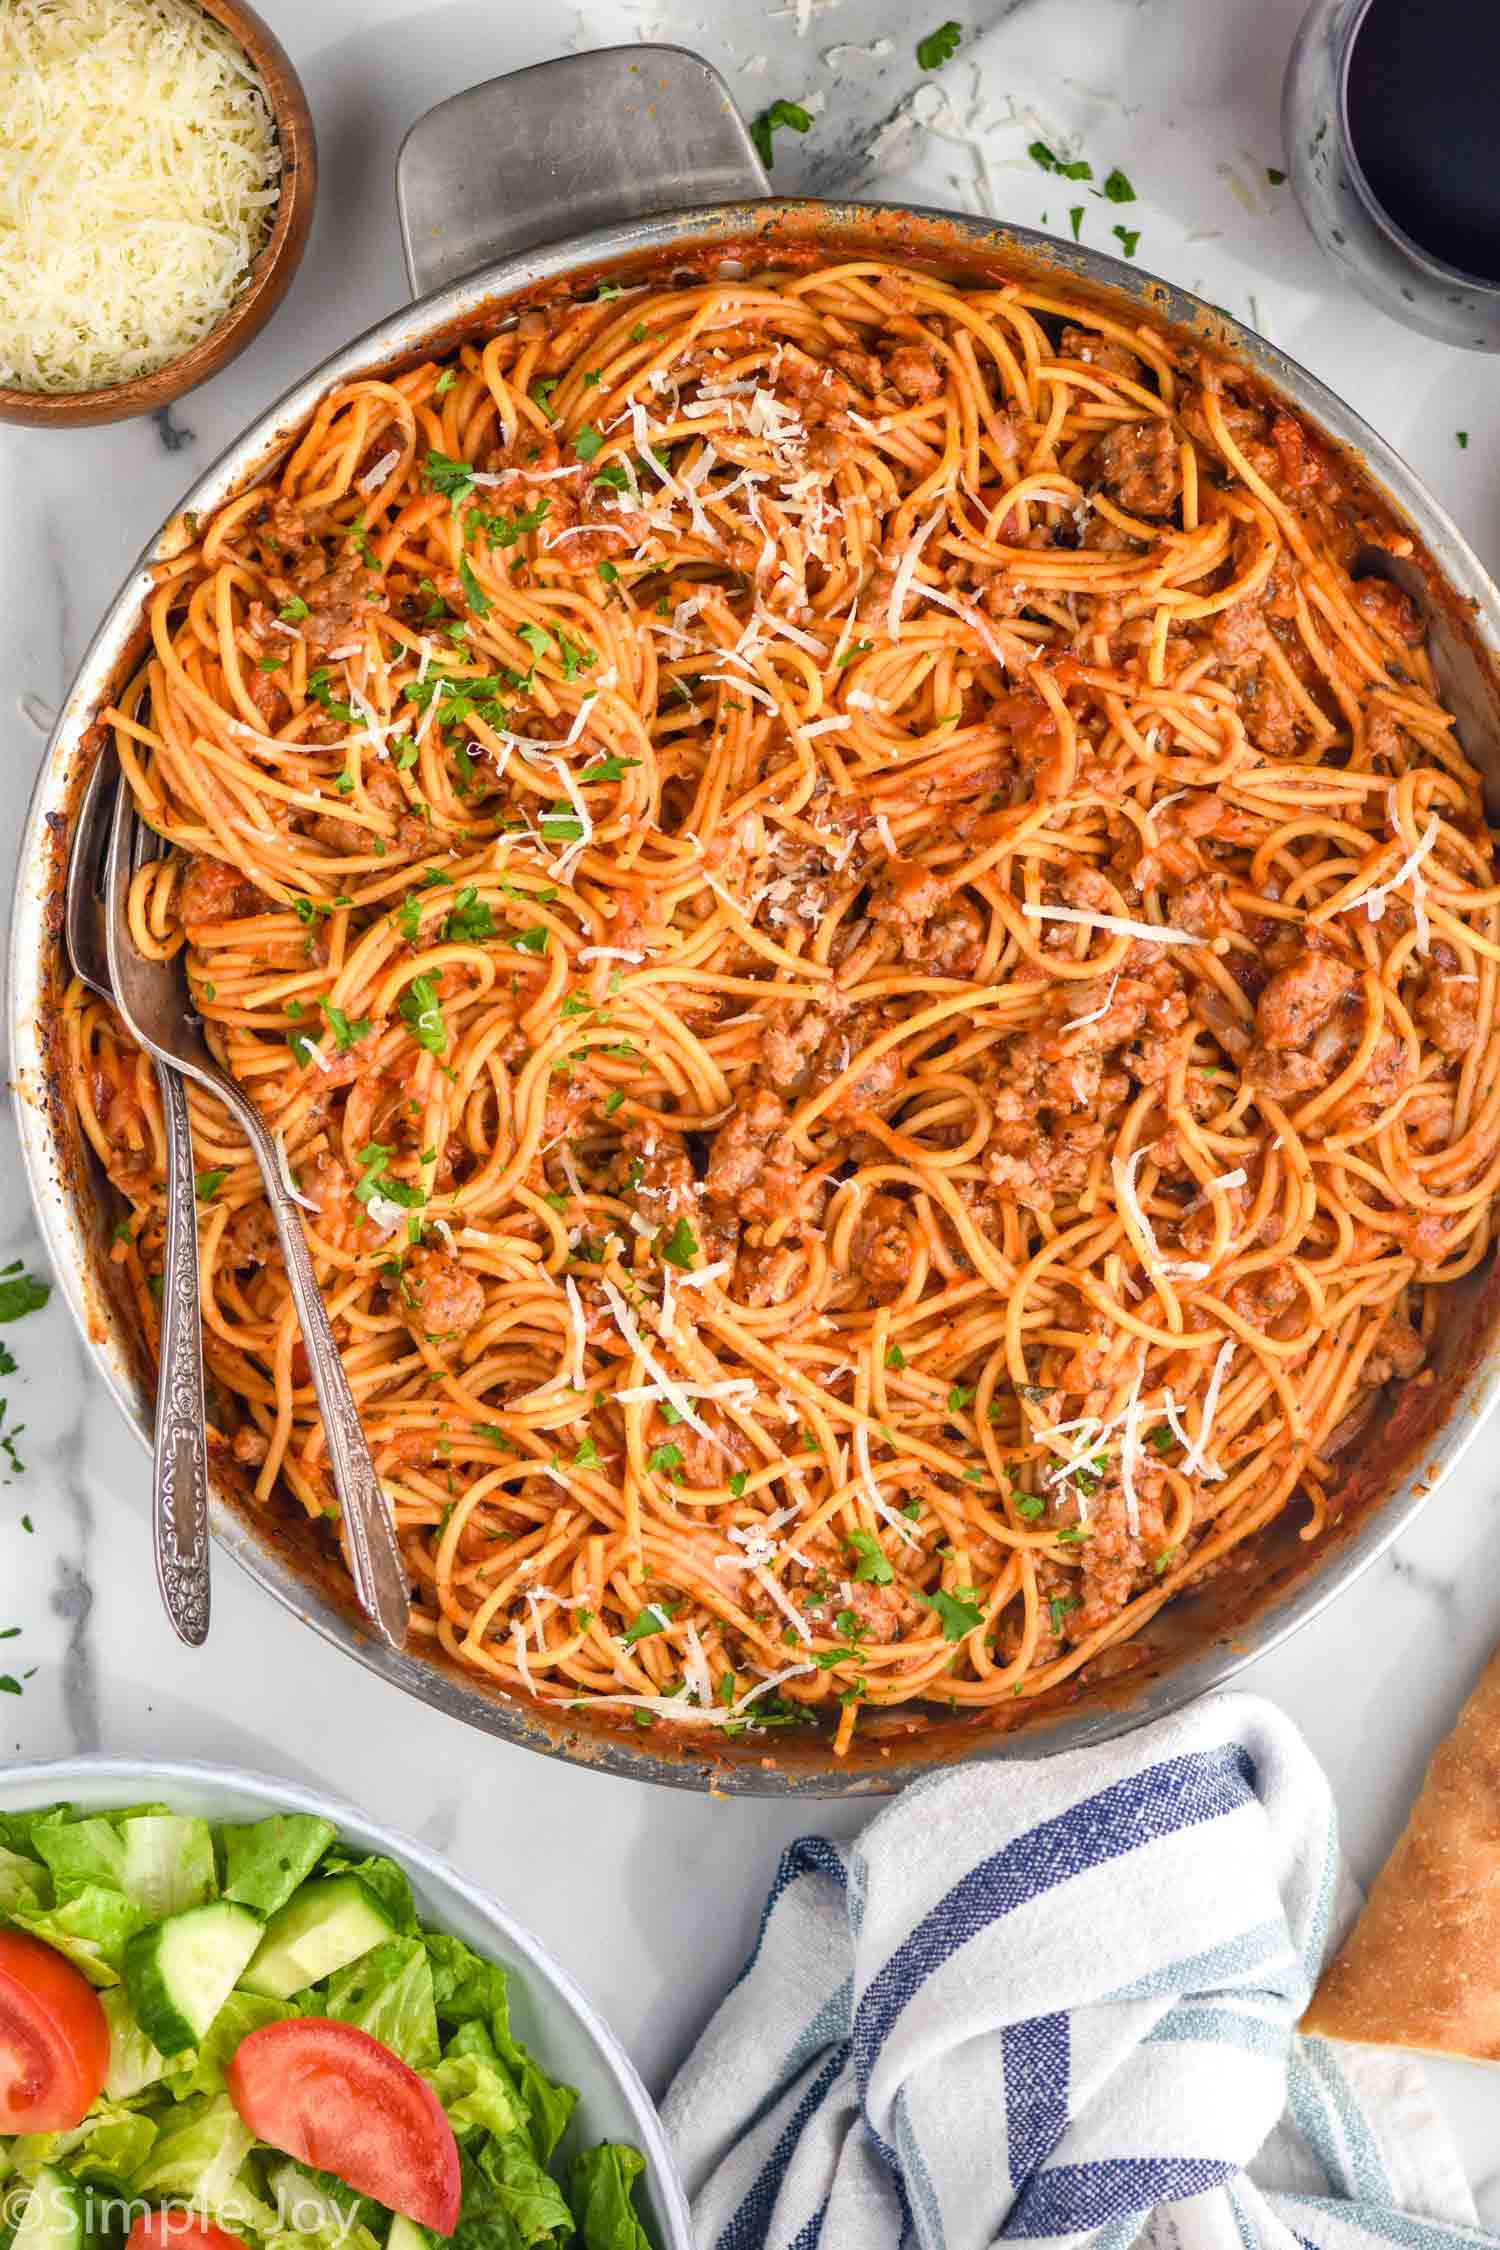 Overhead view of a pot of Sausage Spaghetti in large skillet garnished with shredded parmesan and parsley, two forks for serving. with salad, bread, red wine, and parmesan beside.